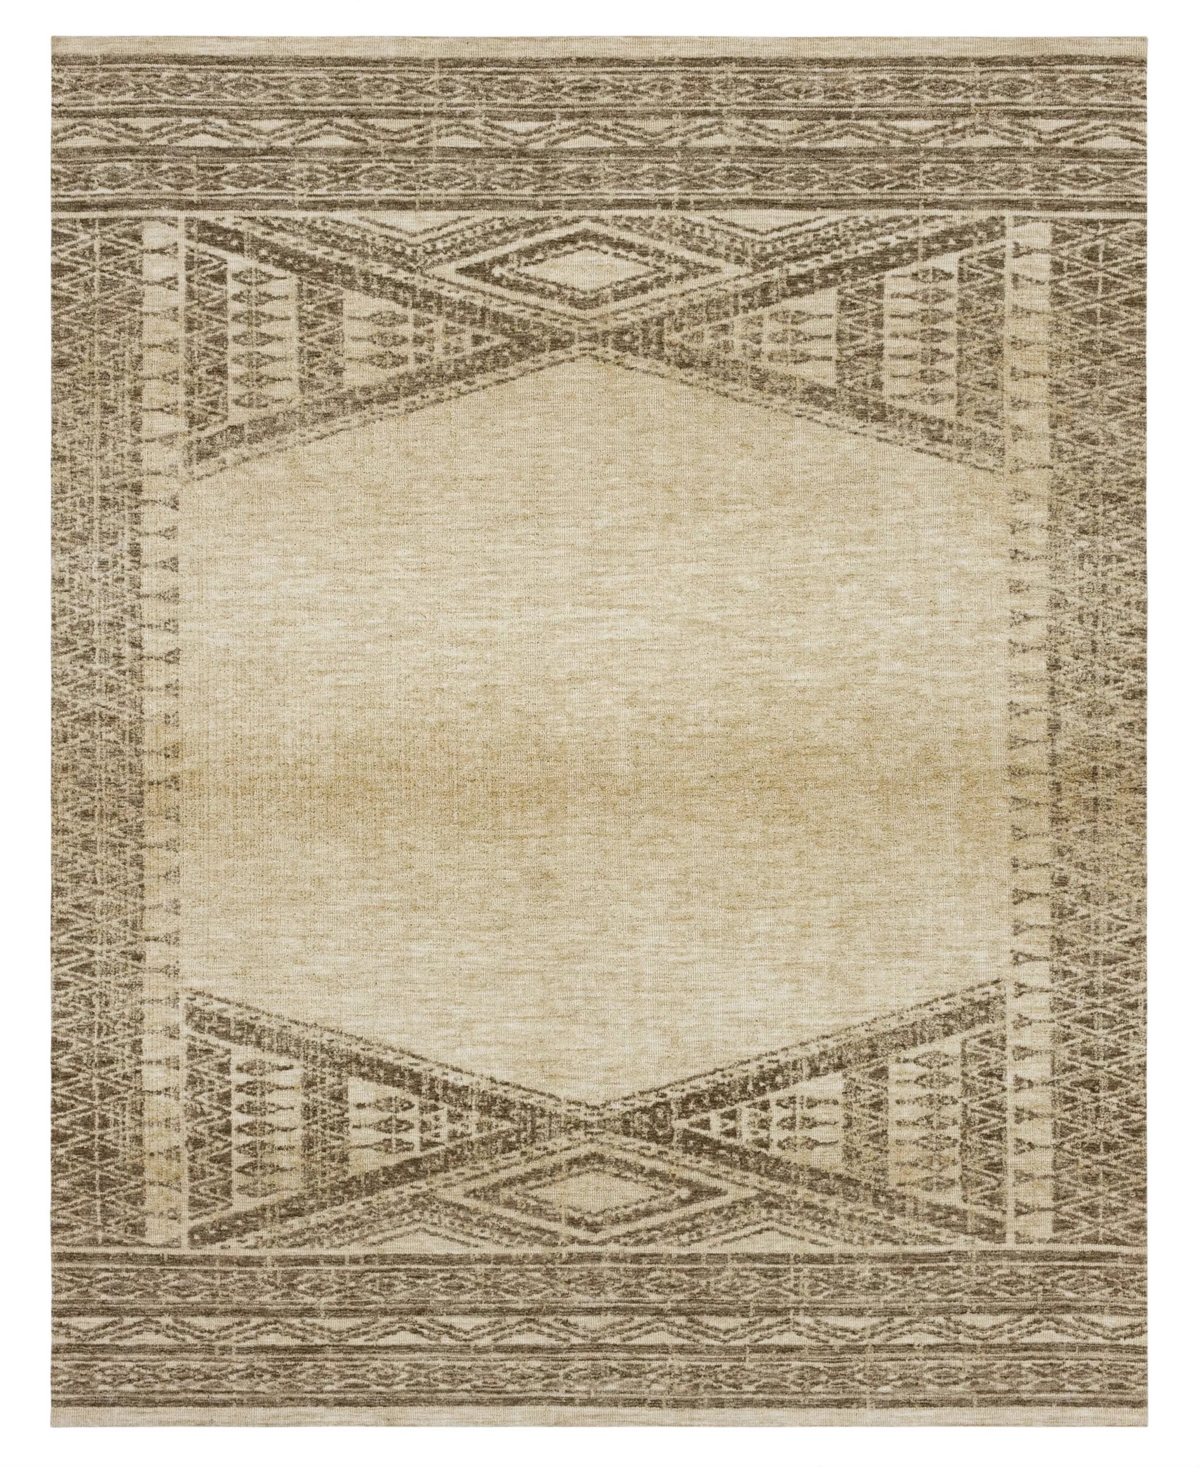 Drew & Jonathan Home Bowen Reverb 5'3" X 7'10" Area Rug In Brown